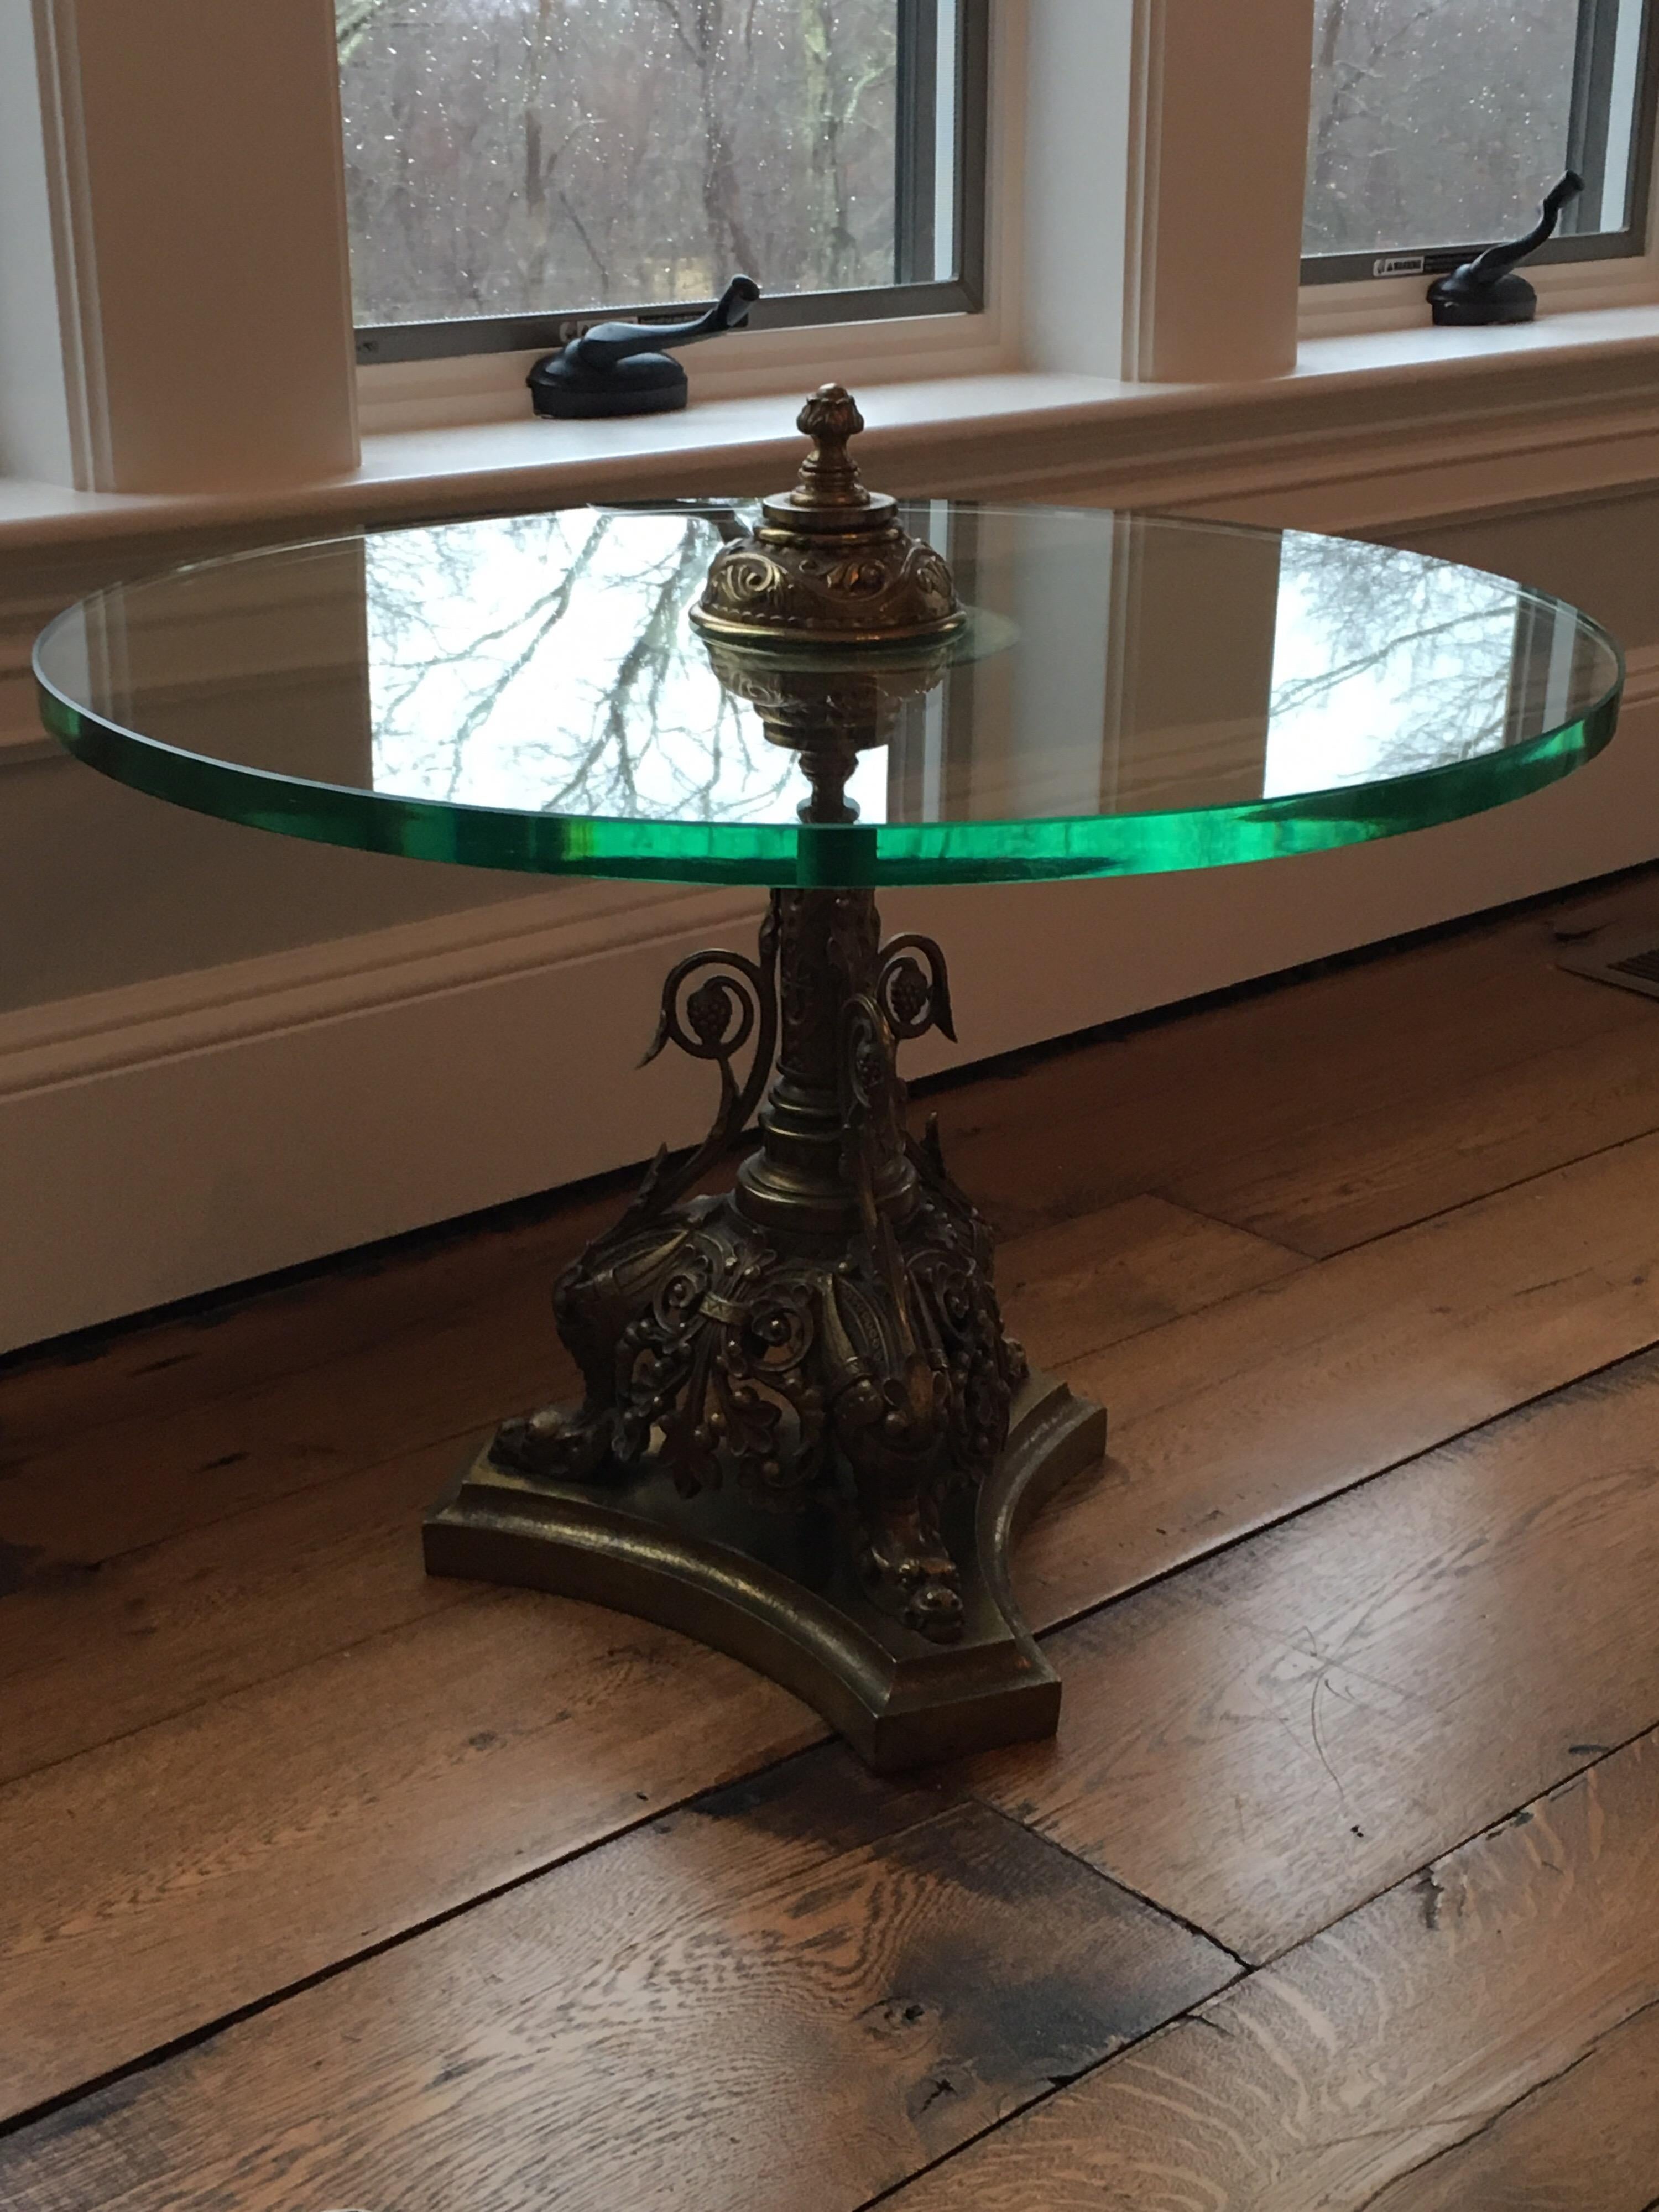 Maison Charles Glass and Bronze Round Table, One of a Kind, 1960s For Sale 1